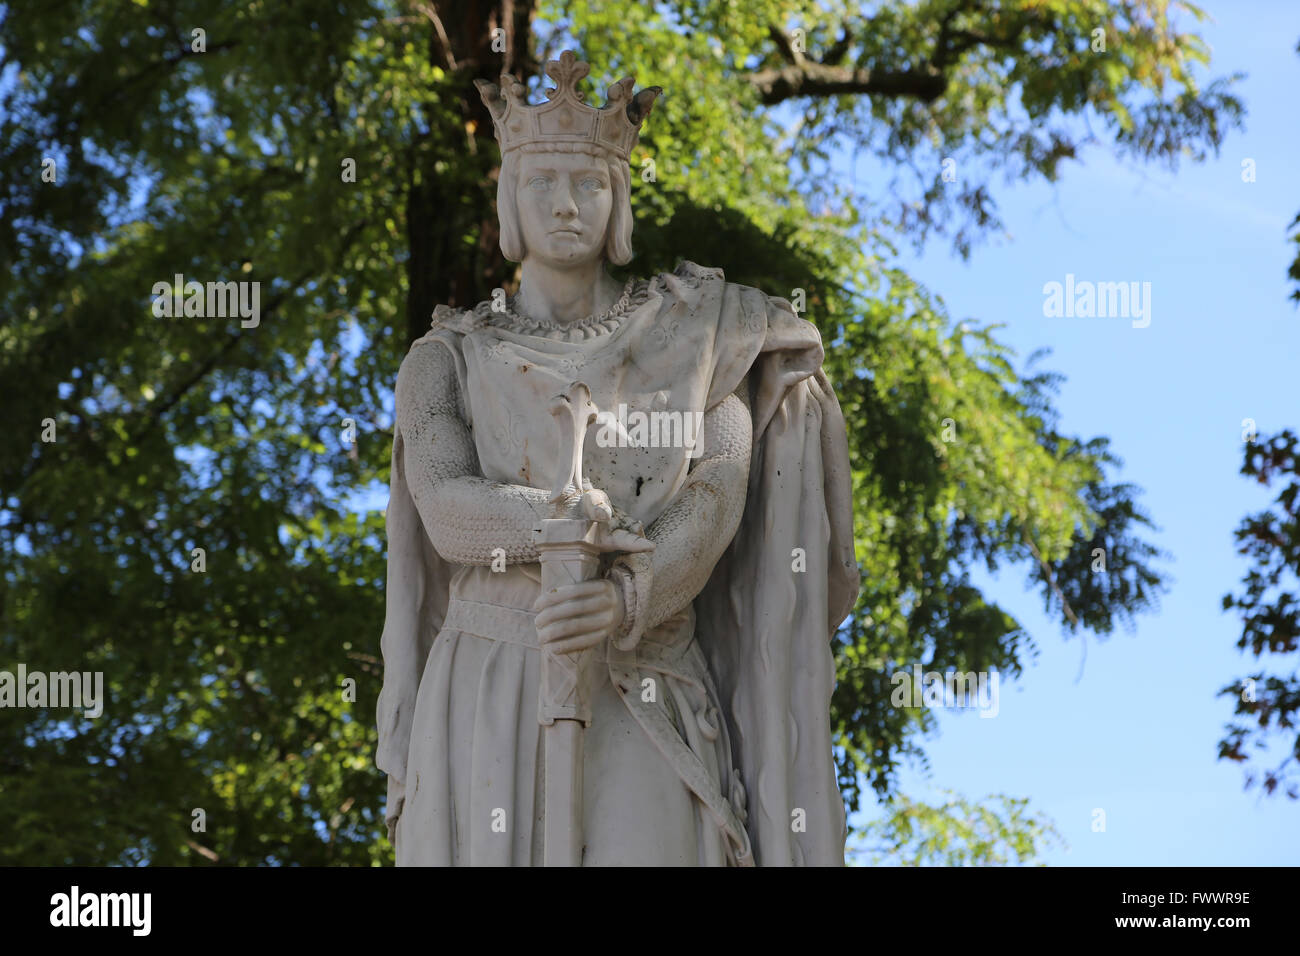 Statue of Saint Louis or Louis IX (1214-1270). King of France.  Vincennes. France. By sculptor A. Mony, 1906. Stock Photo